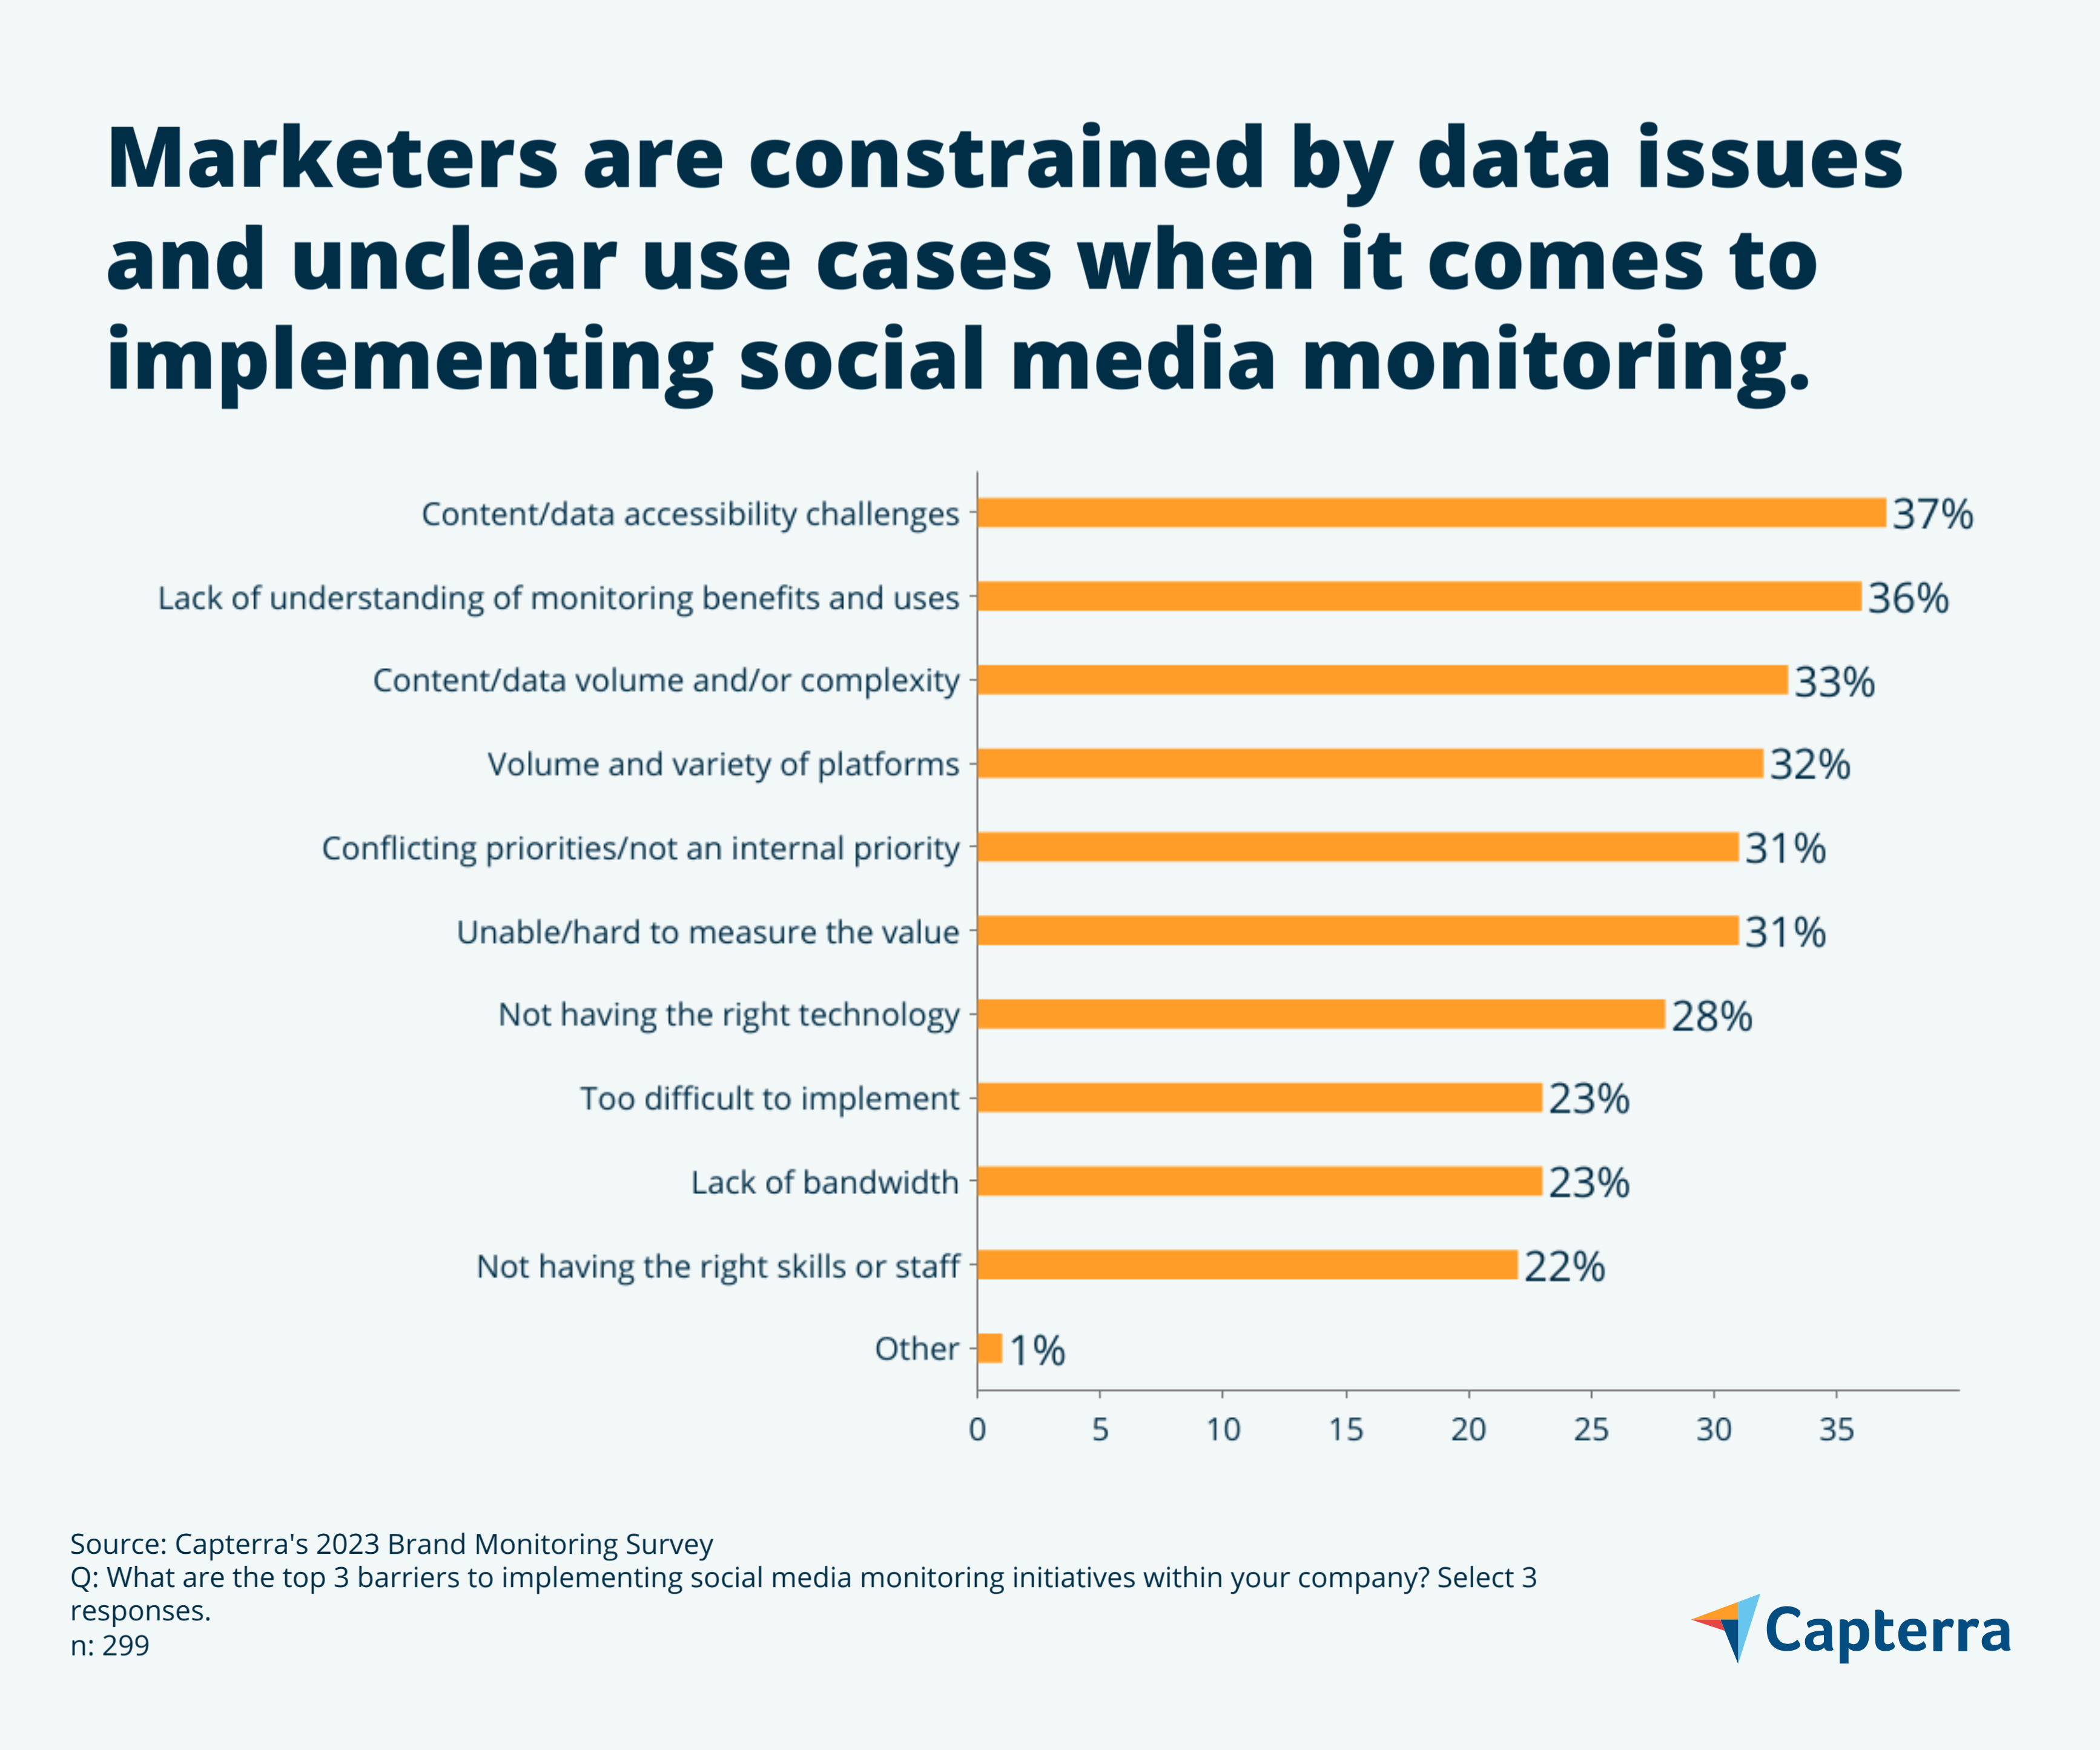 Data issues and unclear use cases graphic for the blog article "Why Marketers Need a Brand Monitoring Strategy in the Age of AI"